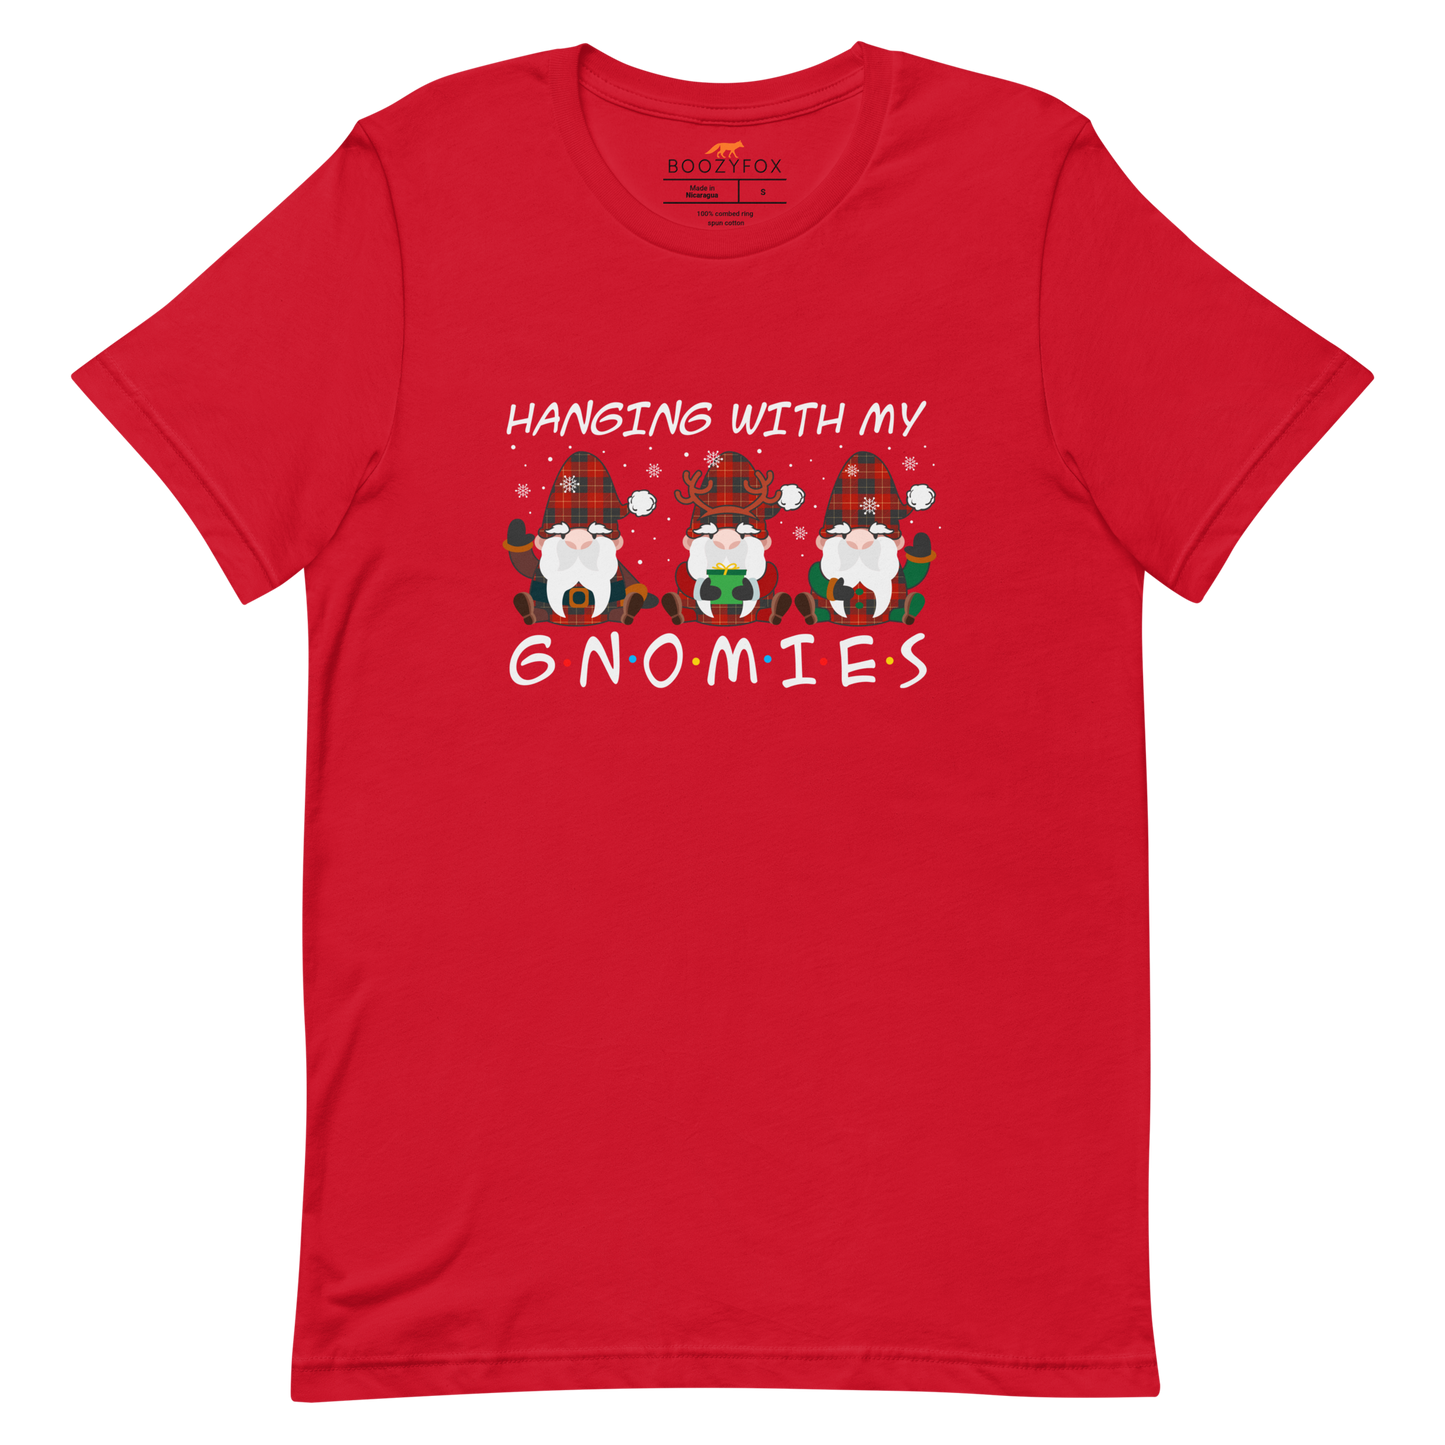 Red Premium Christmas Gnome Tee featuring a delight Hanging With My Gnomies graphic on the chest - Funny Christmas Graphic Gnome Tees - Boozy Fox